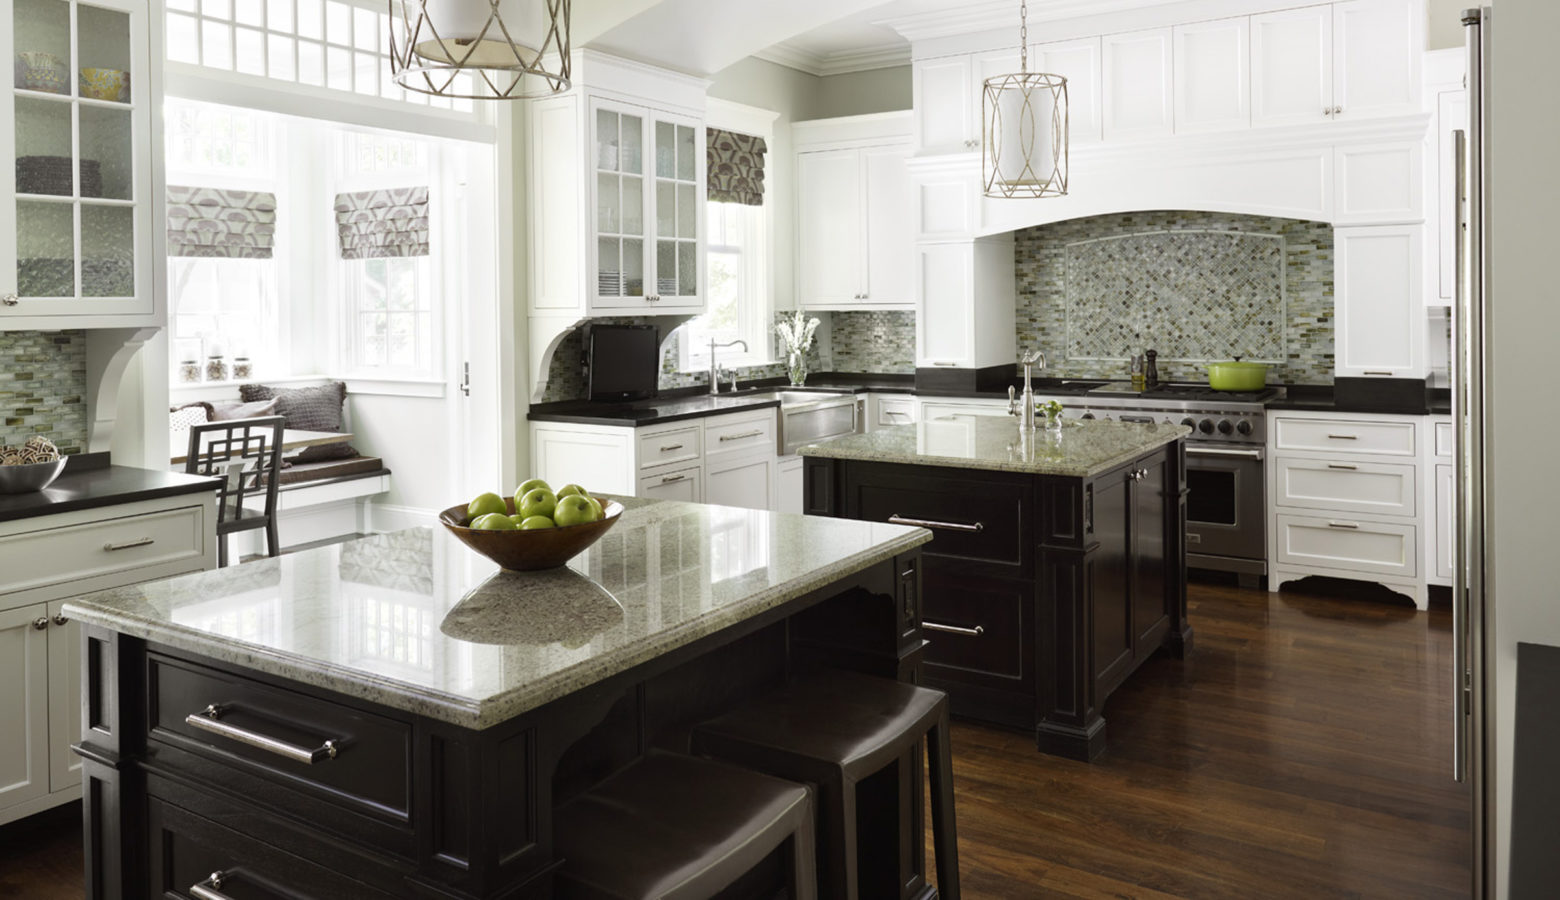 How Advances in Kitchen Appliance Technology are Impacting Residential Interior Design Planning